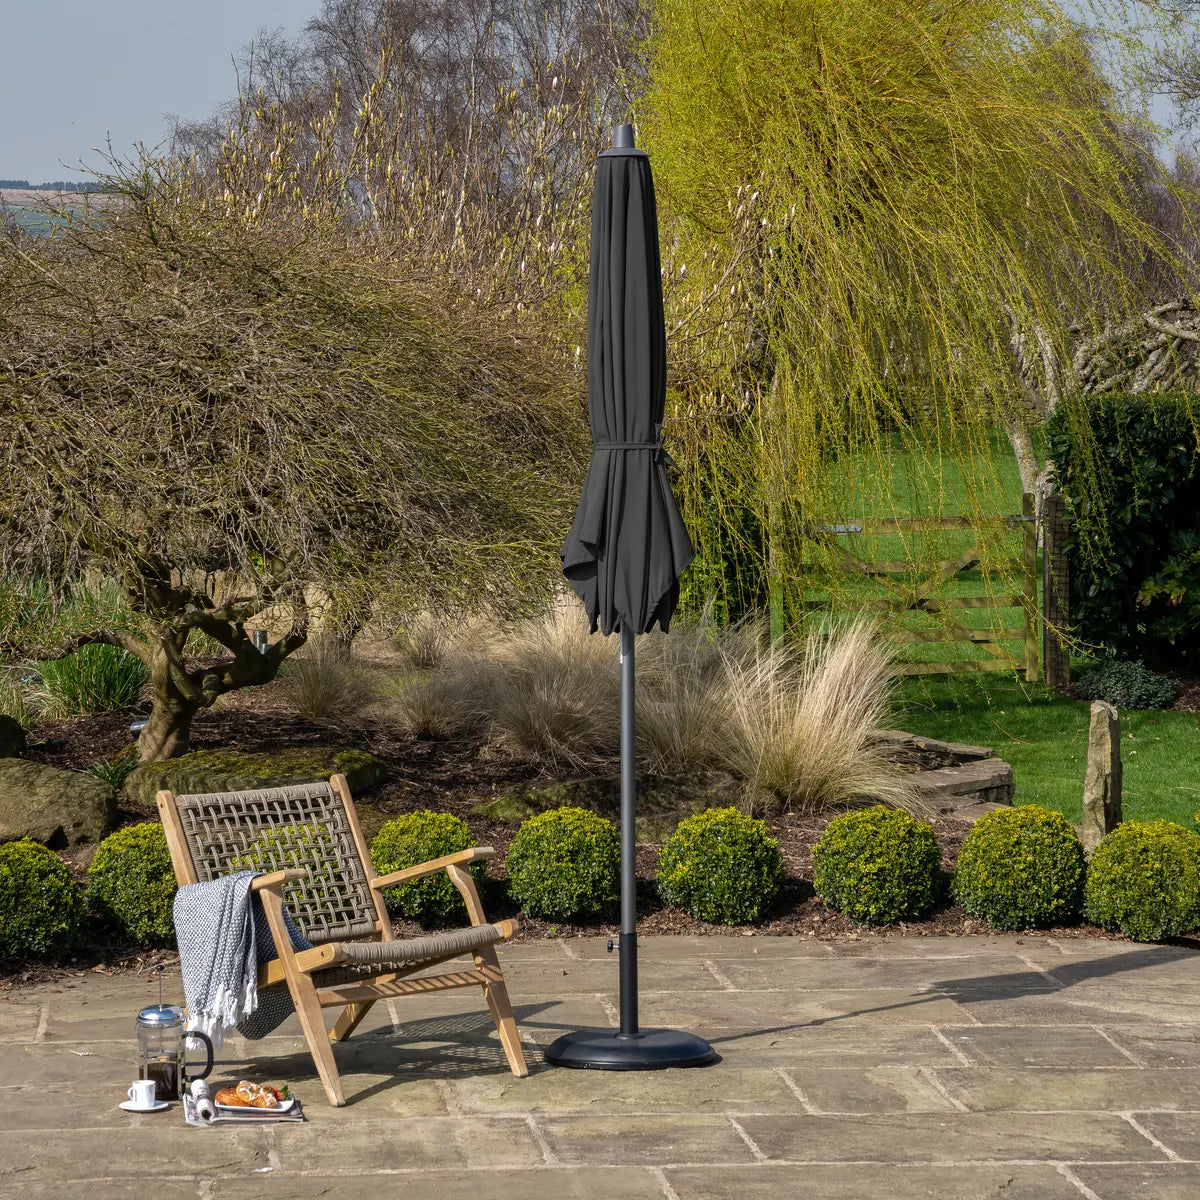 Platinum Riva 3m Round Centre Pole Parasol in Anthracite Grey – Click Style